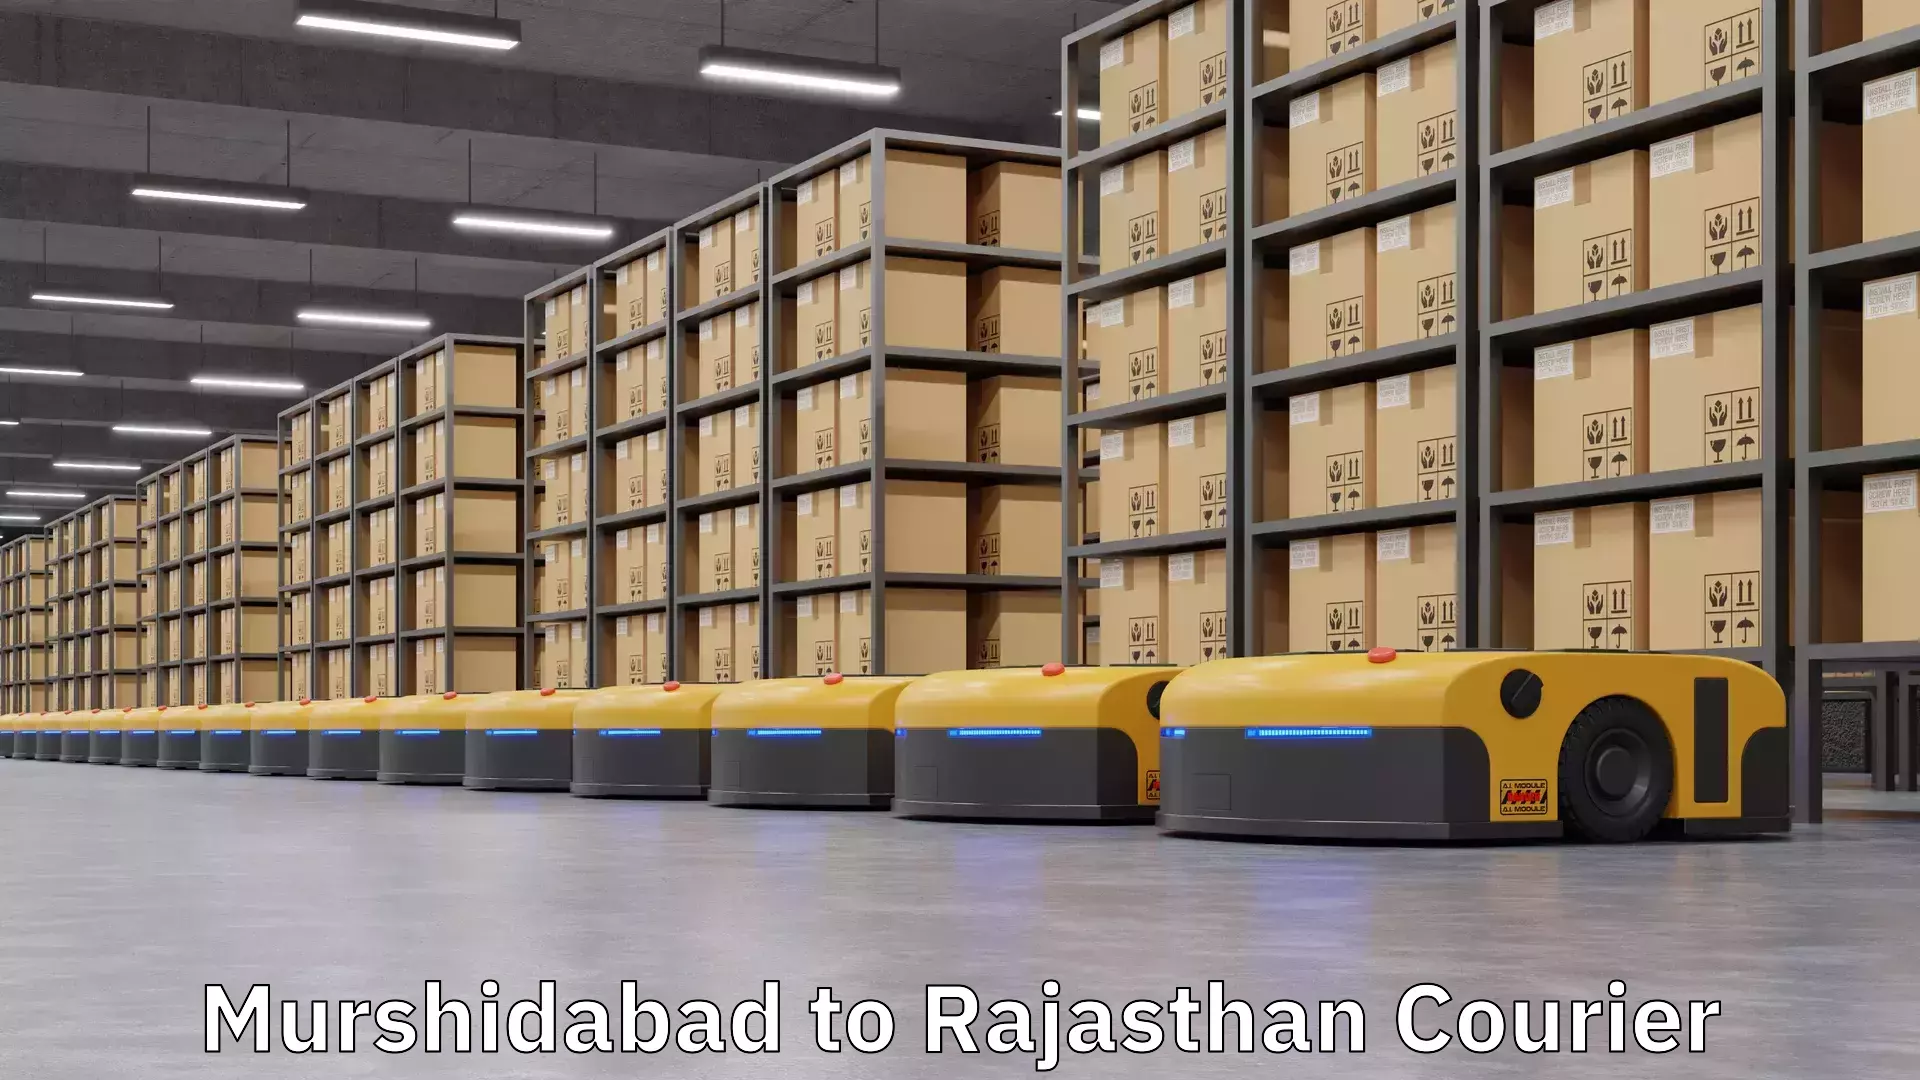 Express delivery network Murshidabad to Rajasthan